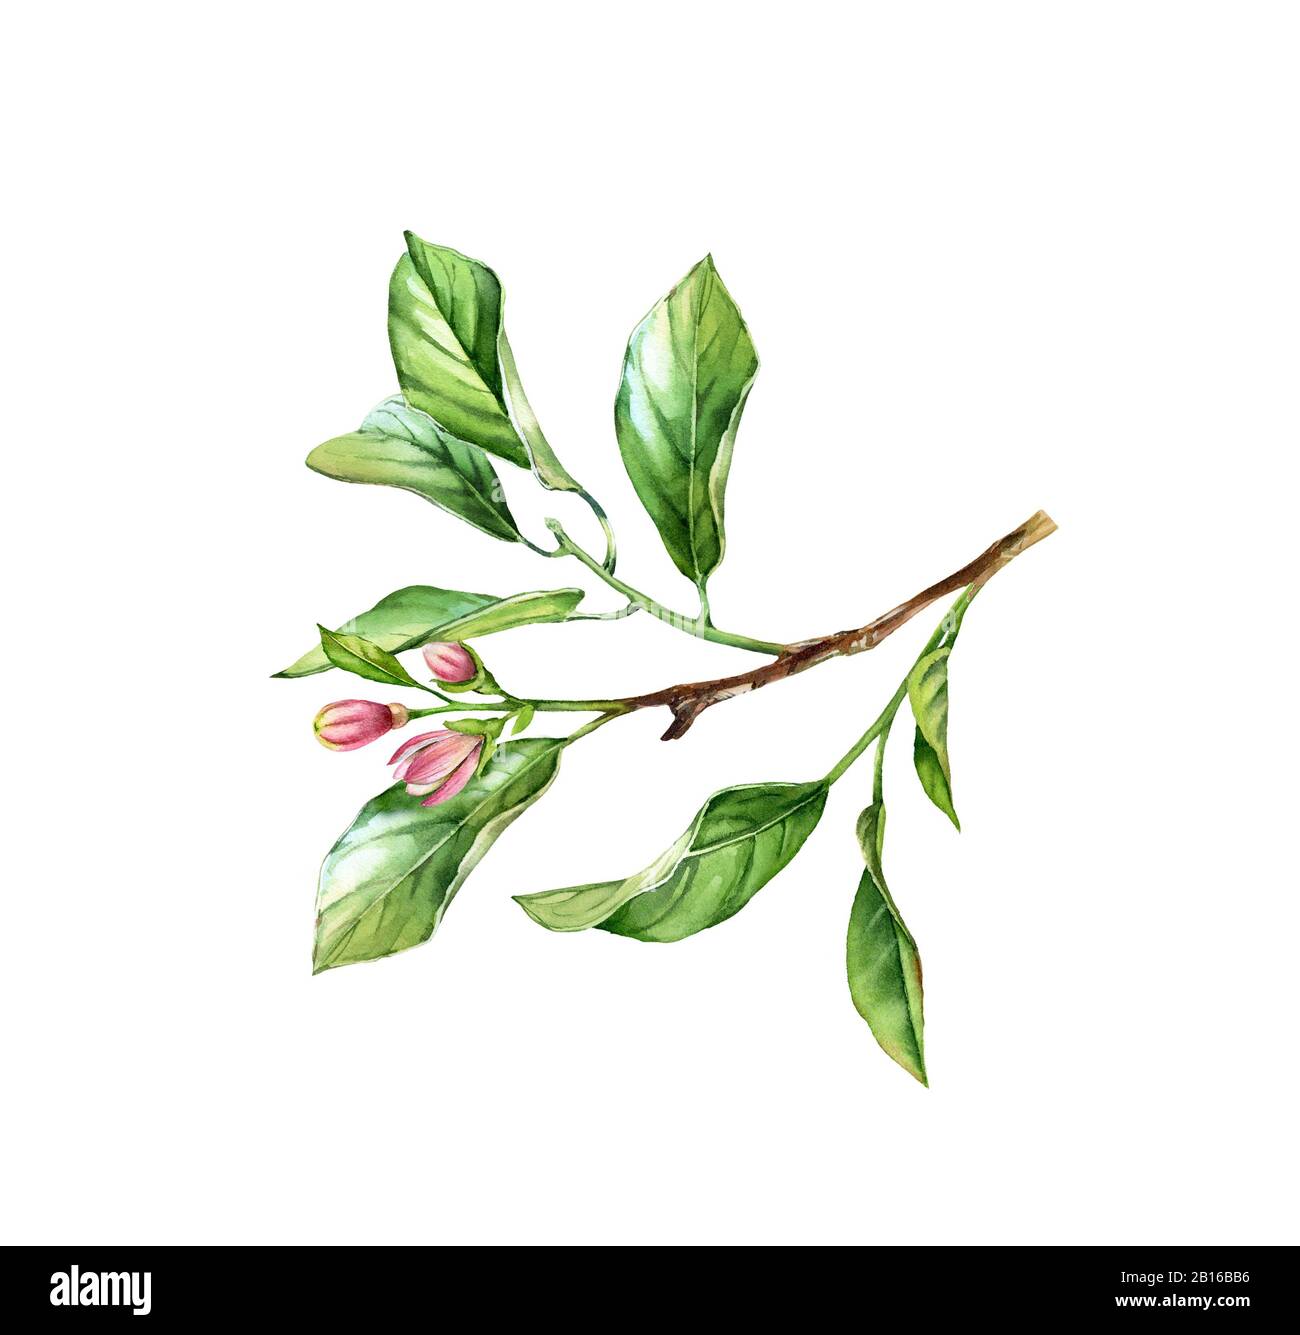 https://c8.alamy.com/comp/2B16BB6/watercolor-tree-branch-realistic-fruit-tree-flowers-leaves-botanical-illustration-isolated-artwork-on-white-hand-painted-foliage-2B16BB6.jpg